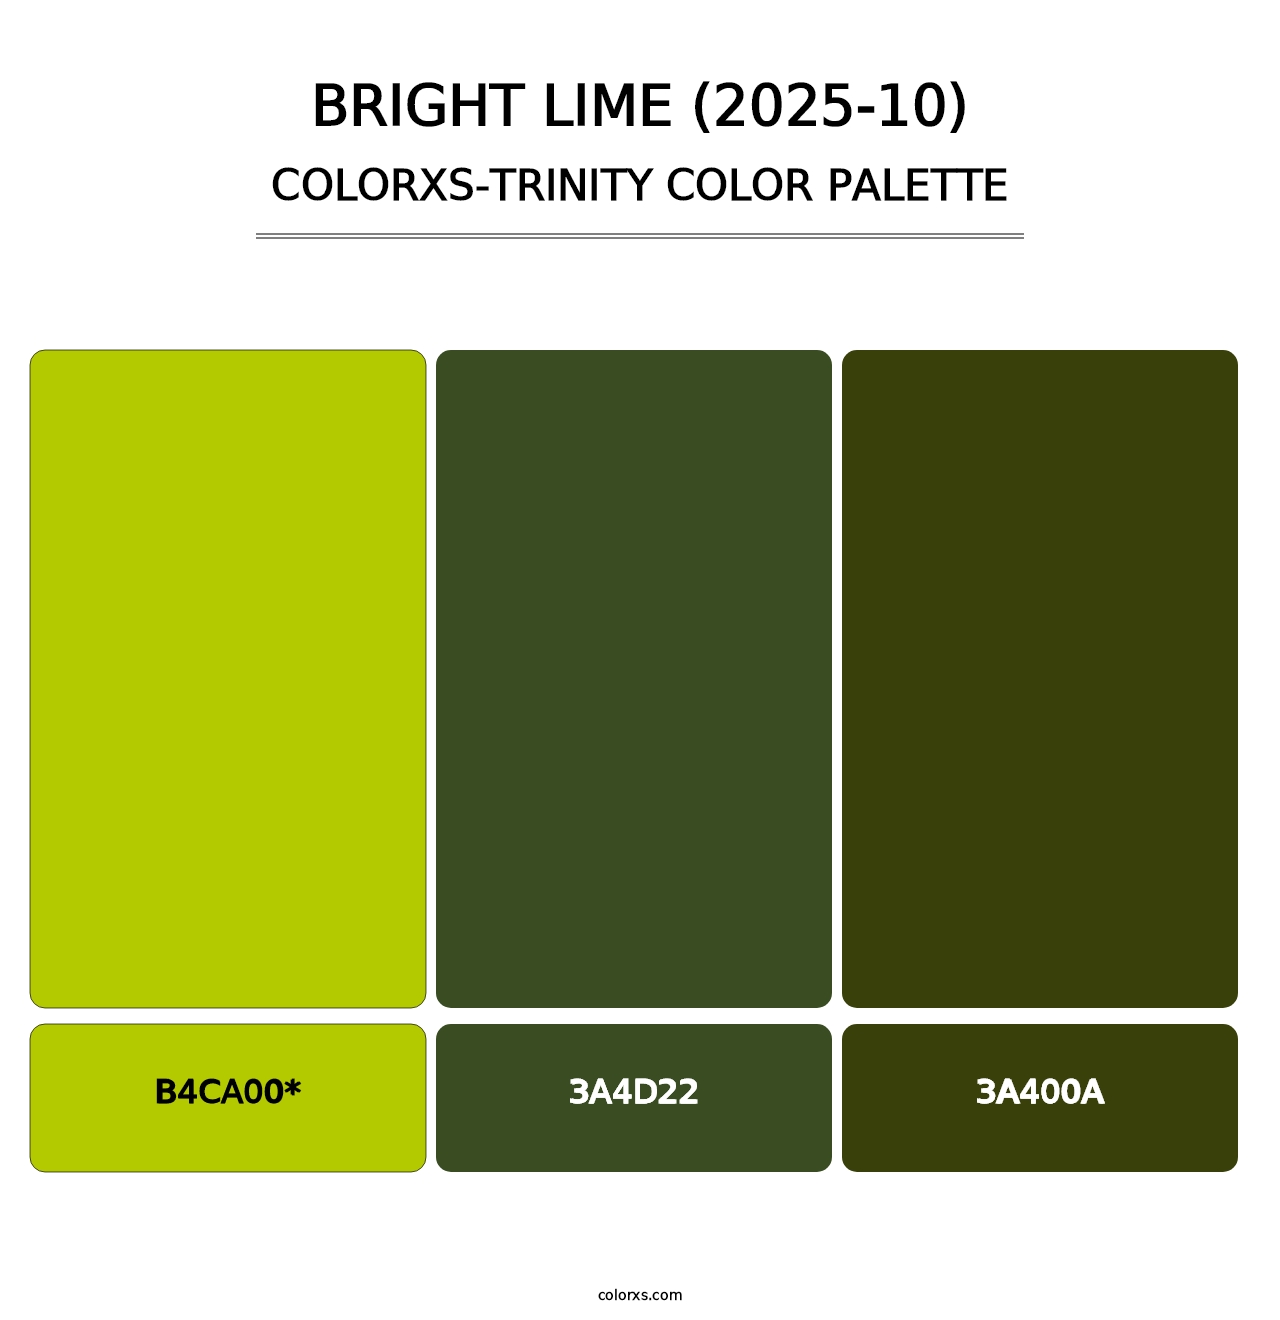 Bright Lime (2025-10) - Colorxs Trinity Palette